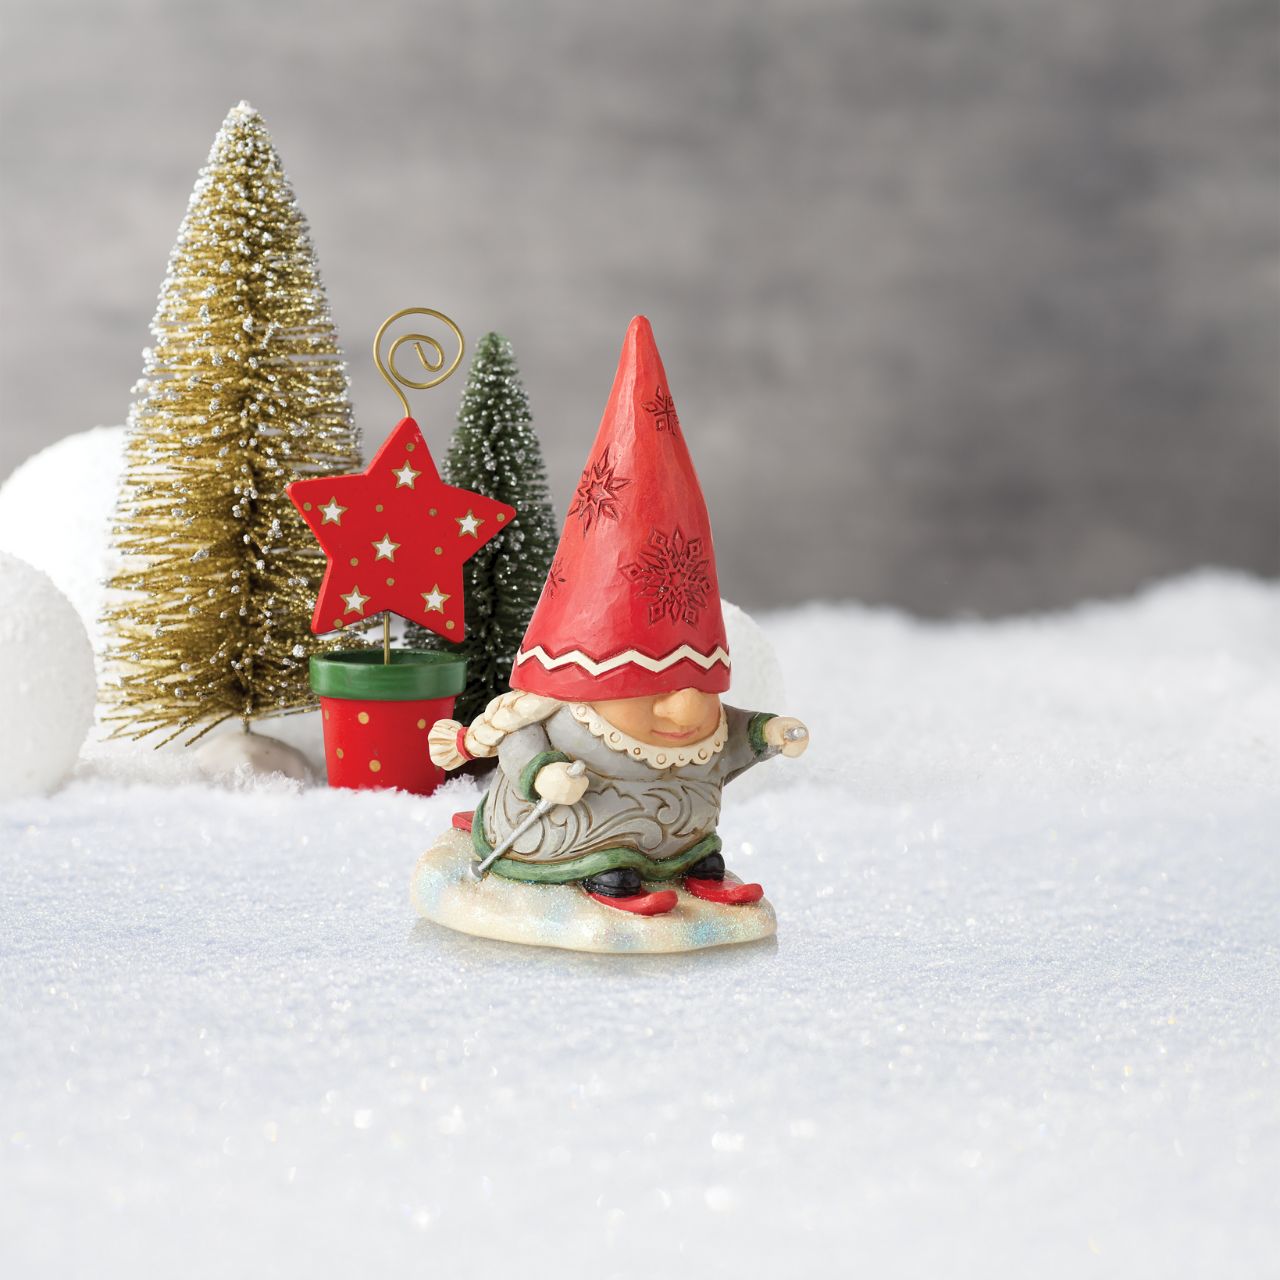 Gnome Skier with Braids Figurine by Jim Shore  "Gnomebody loves Christmas as much as Jim Shore" Gnomes have fast become a collectors favourite for Jim Shore and this collection, new to collection, it won't disappoint. This Snow loving couple are ready for the slopes.